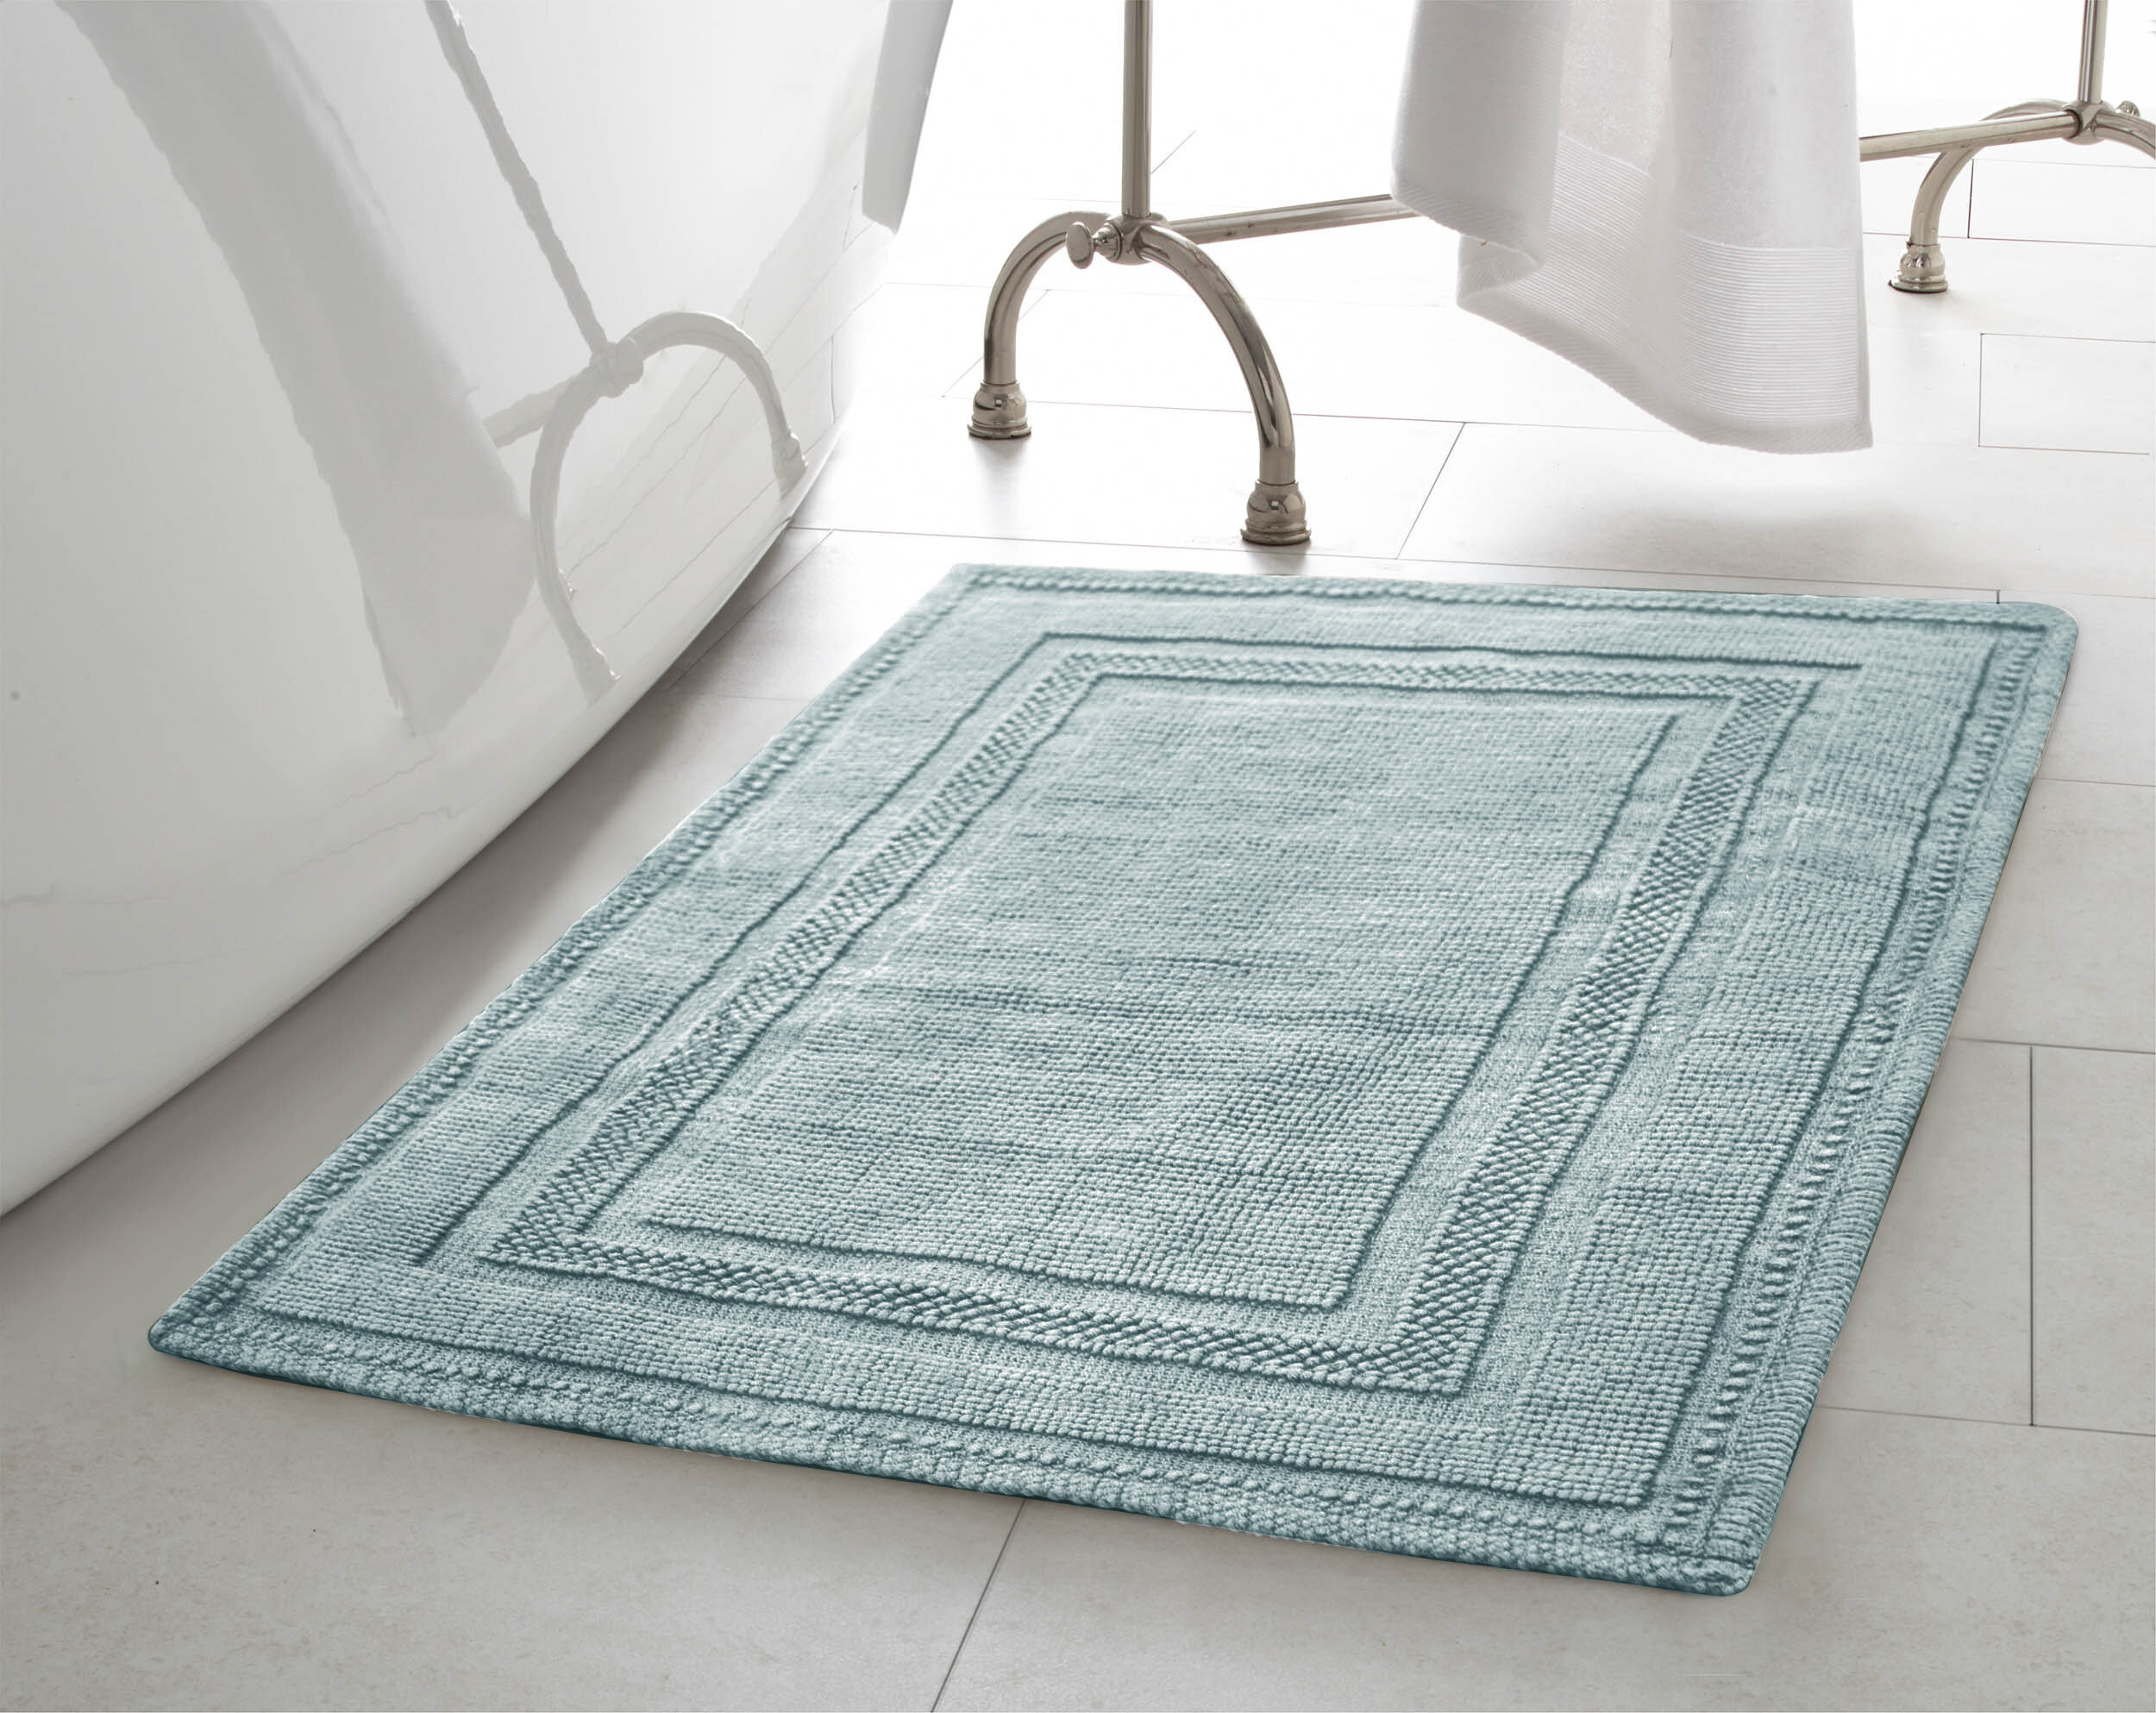 Mat and Toilet Lid Cover New # Bath 66 Fancy Linen 3pc Non-Slip Bath Mat Set with Rectangle Pattern Solid Hunter Green Bathroom U-Shaped Contour Rug